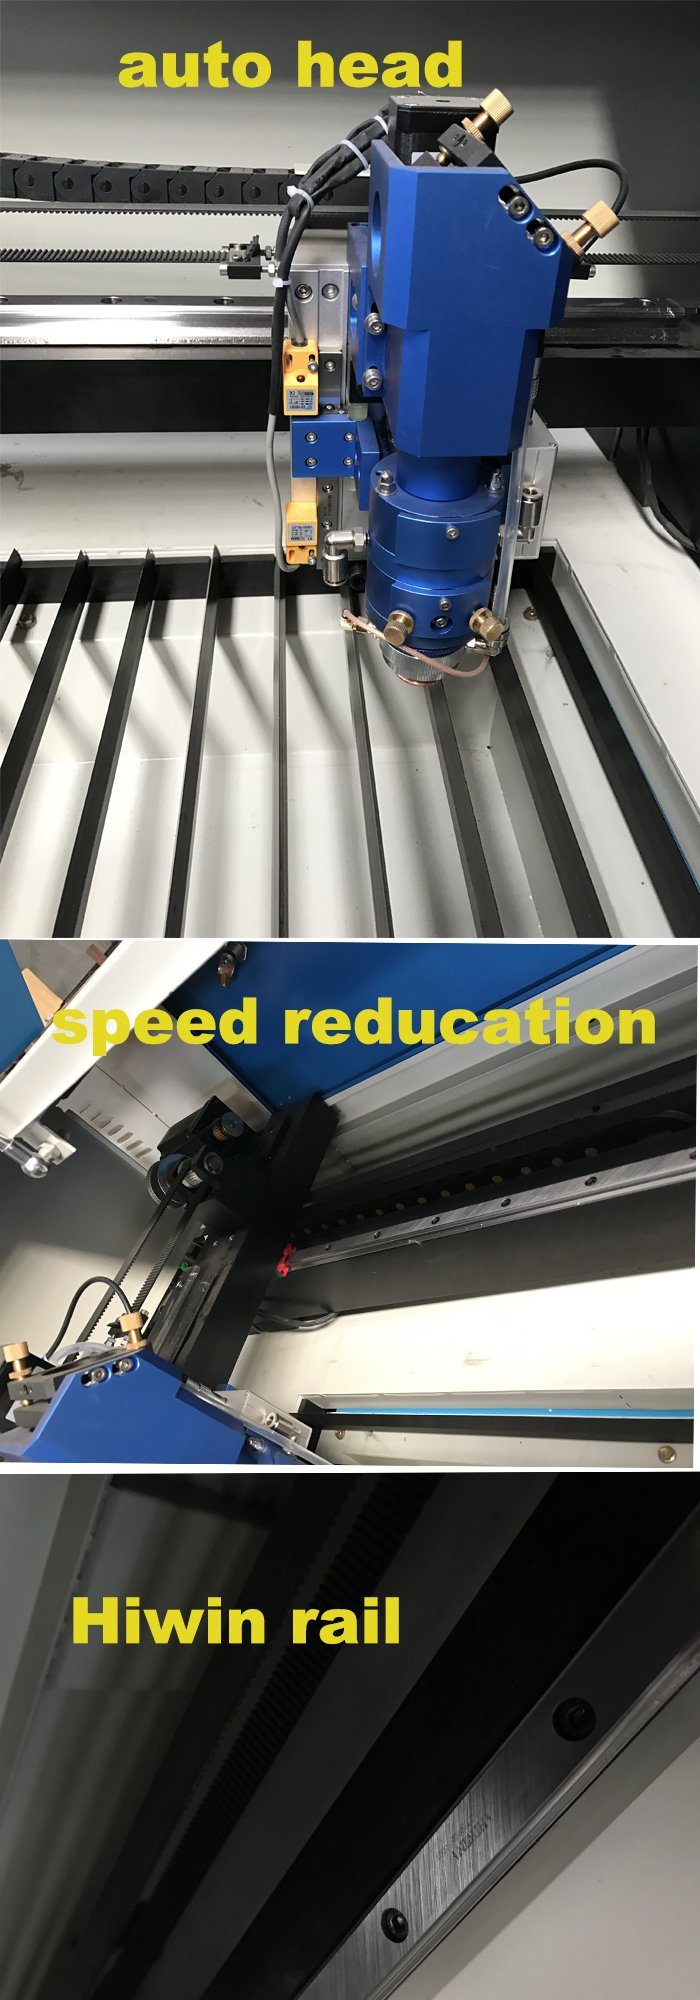 Small-Scale Metal Laser Cutting Machine for Stainless Steel